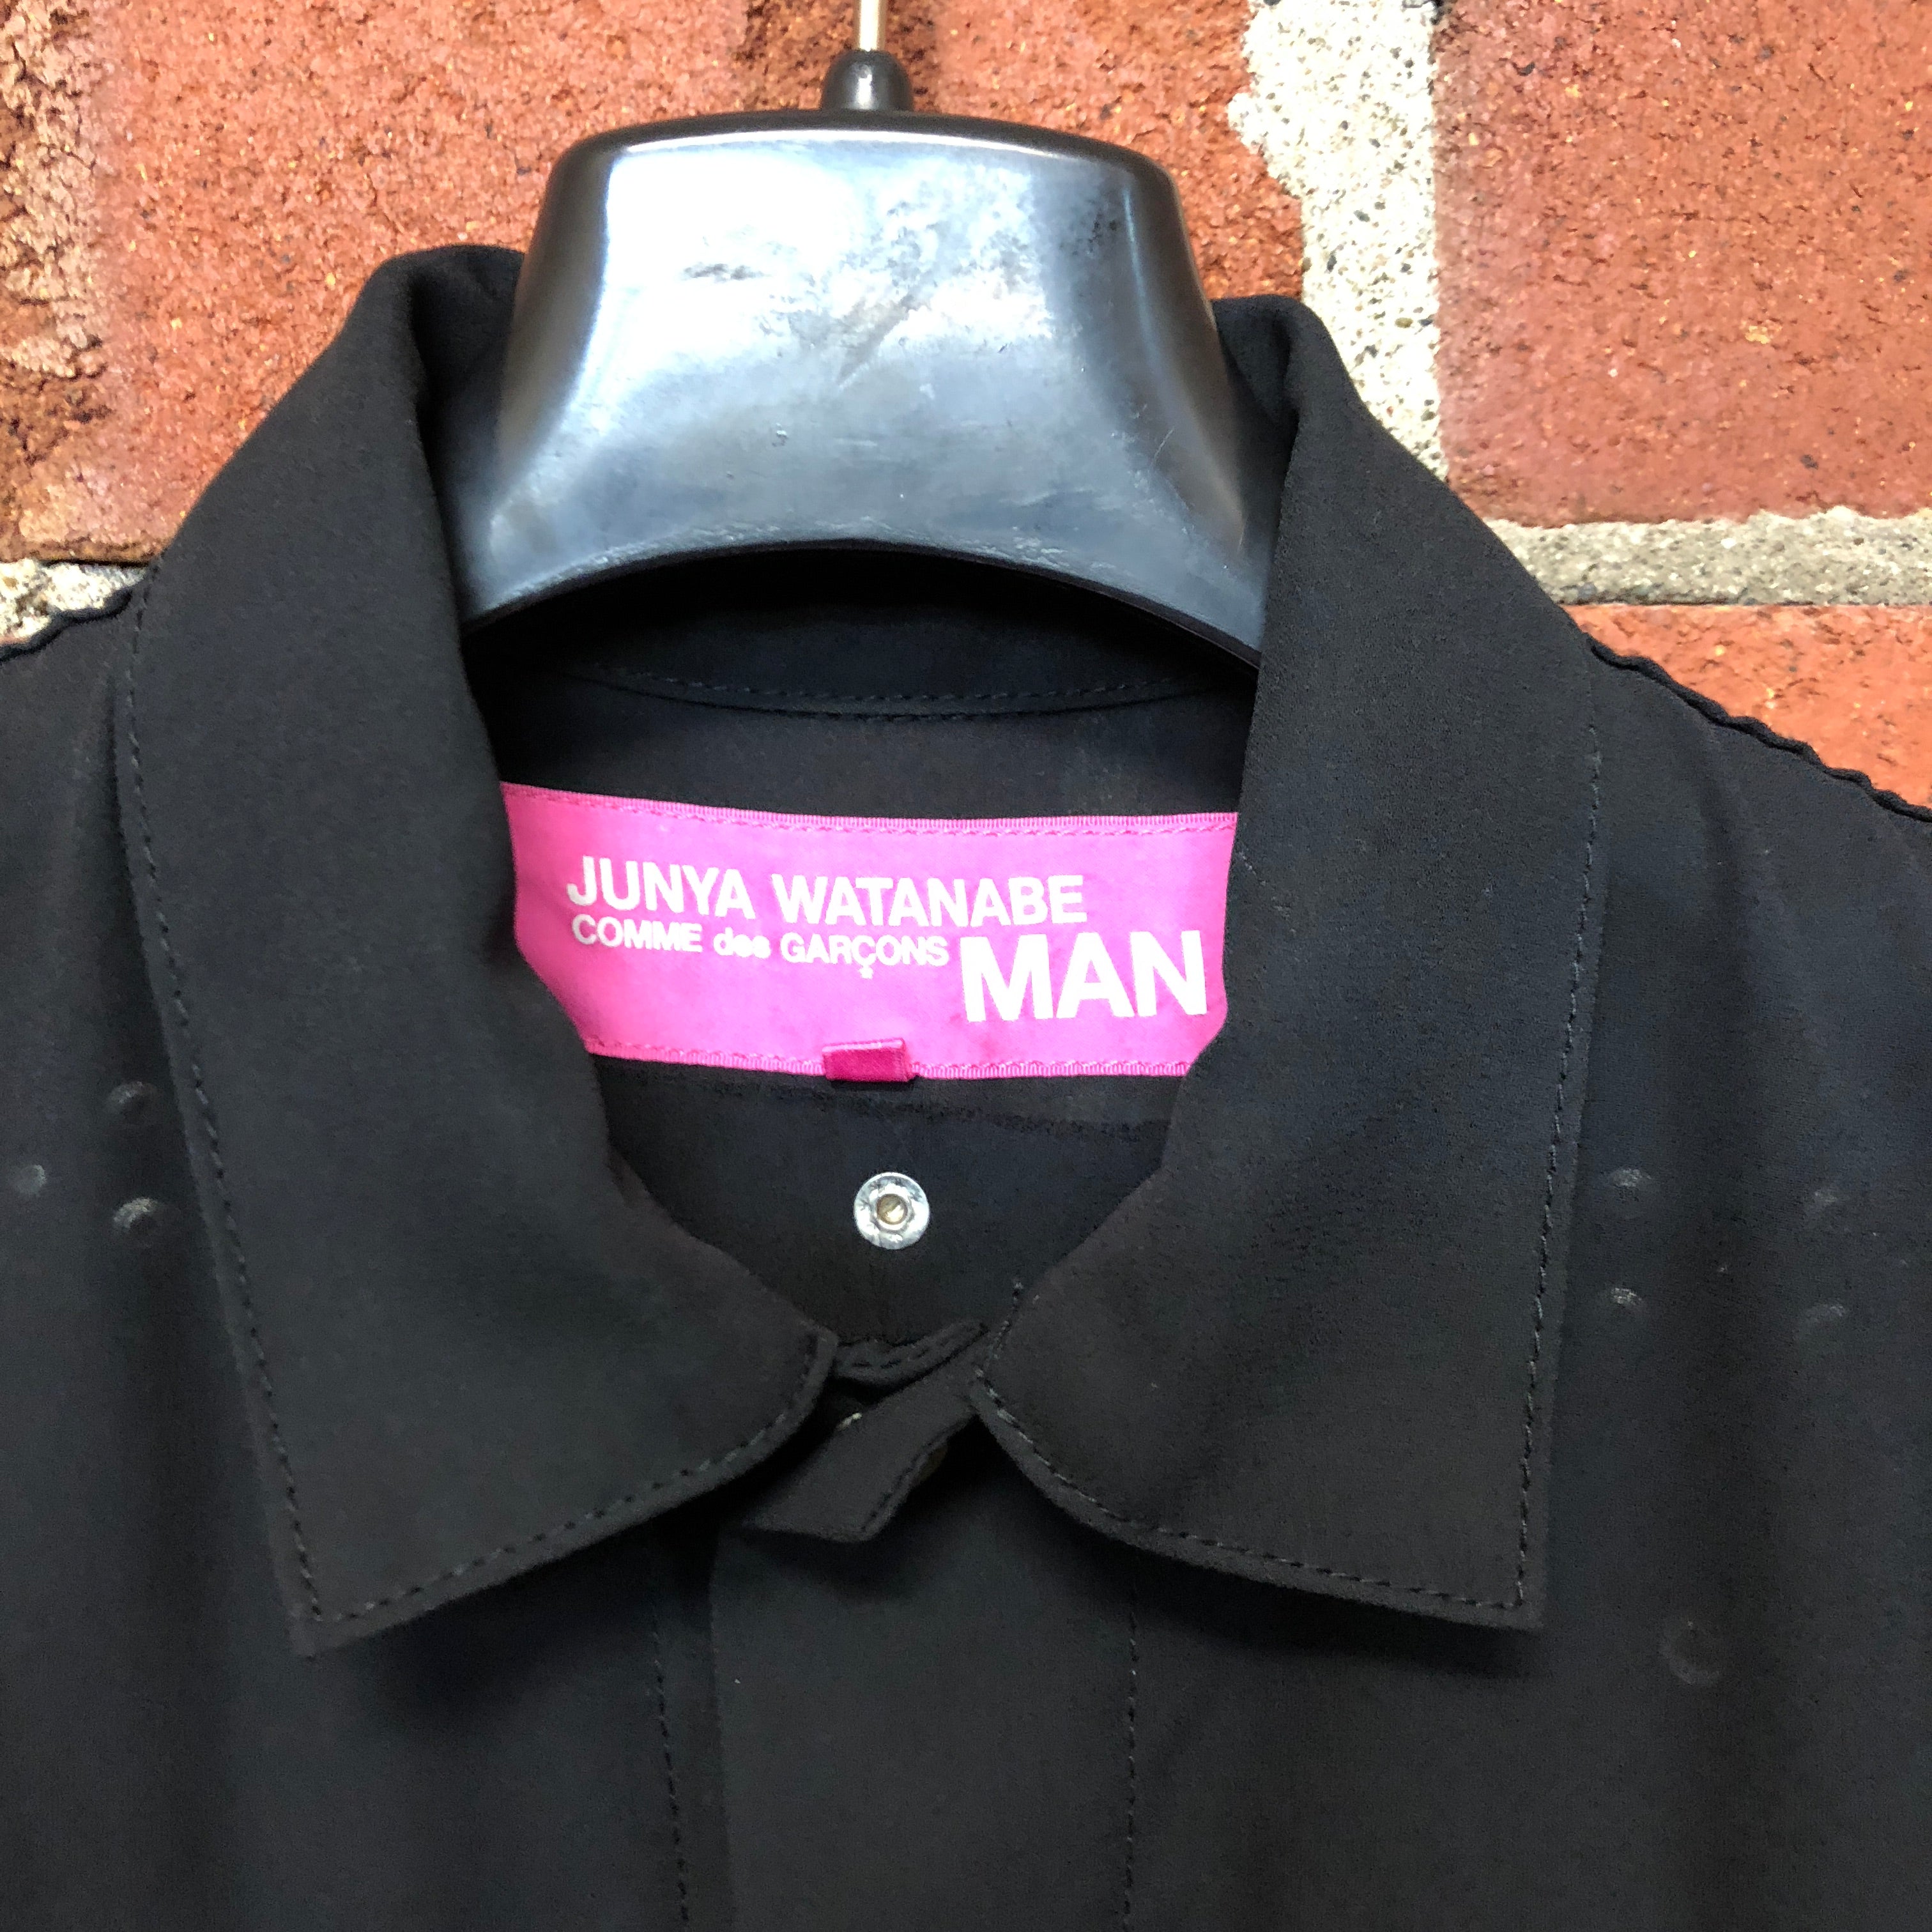 JUNYA WATANABE X COMME DES GARCONS 'MAN' collection jacket